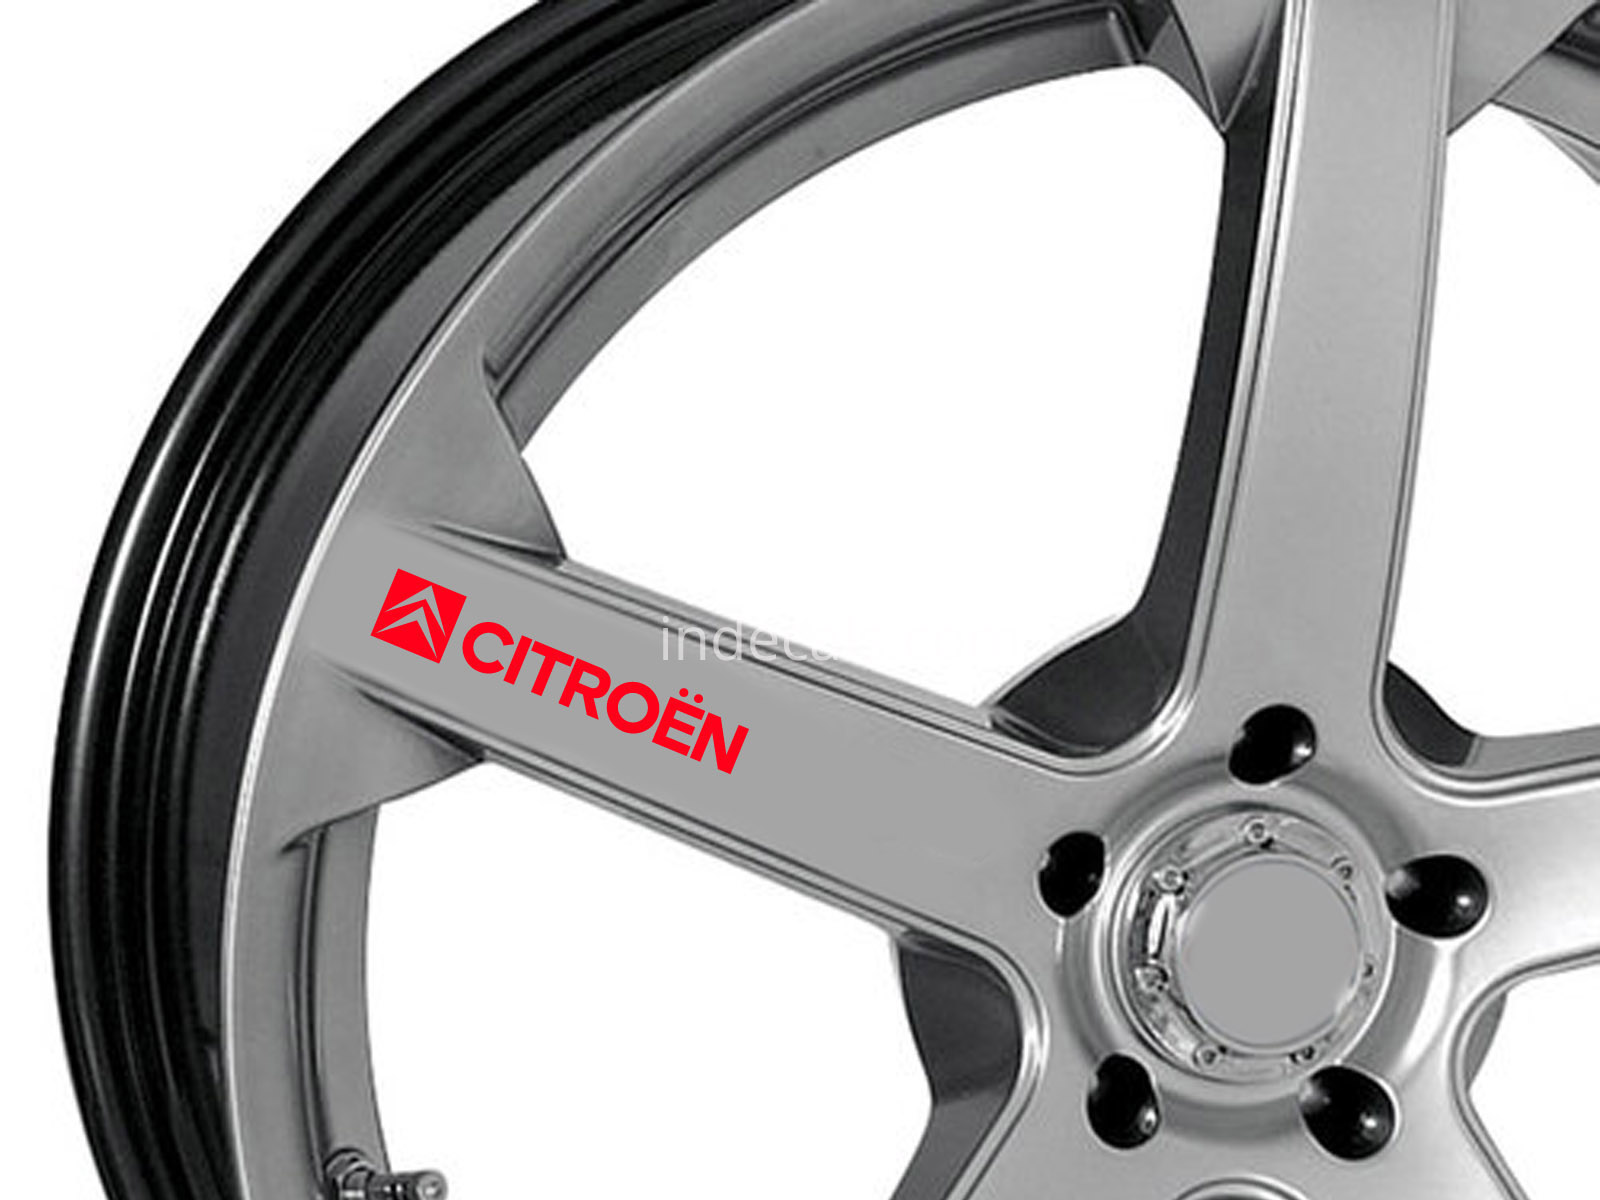 6 x Citroen Stickers for Wheels - Red